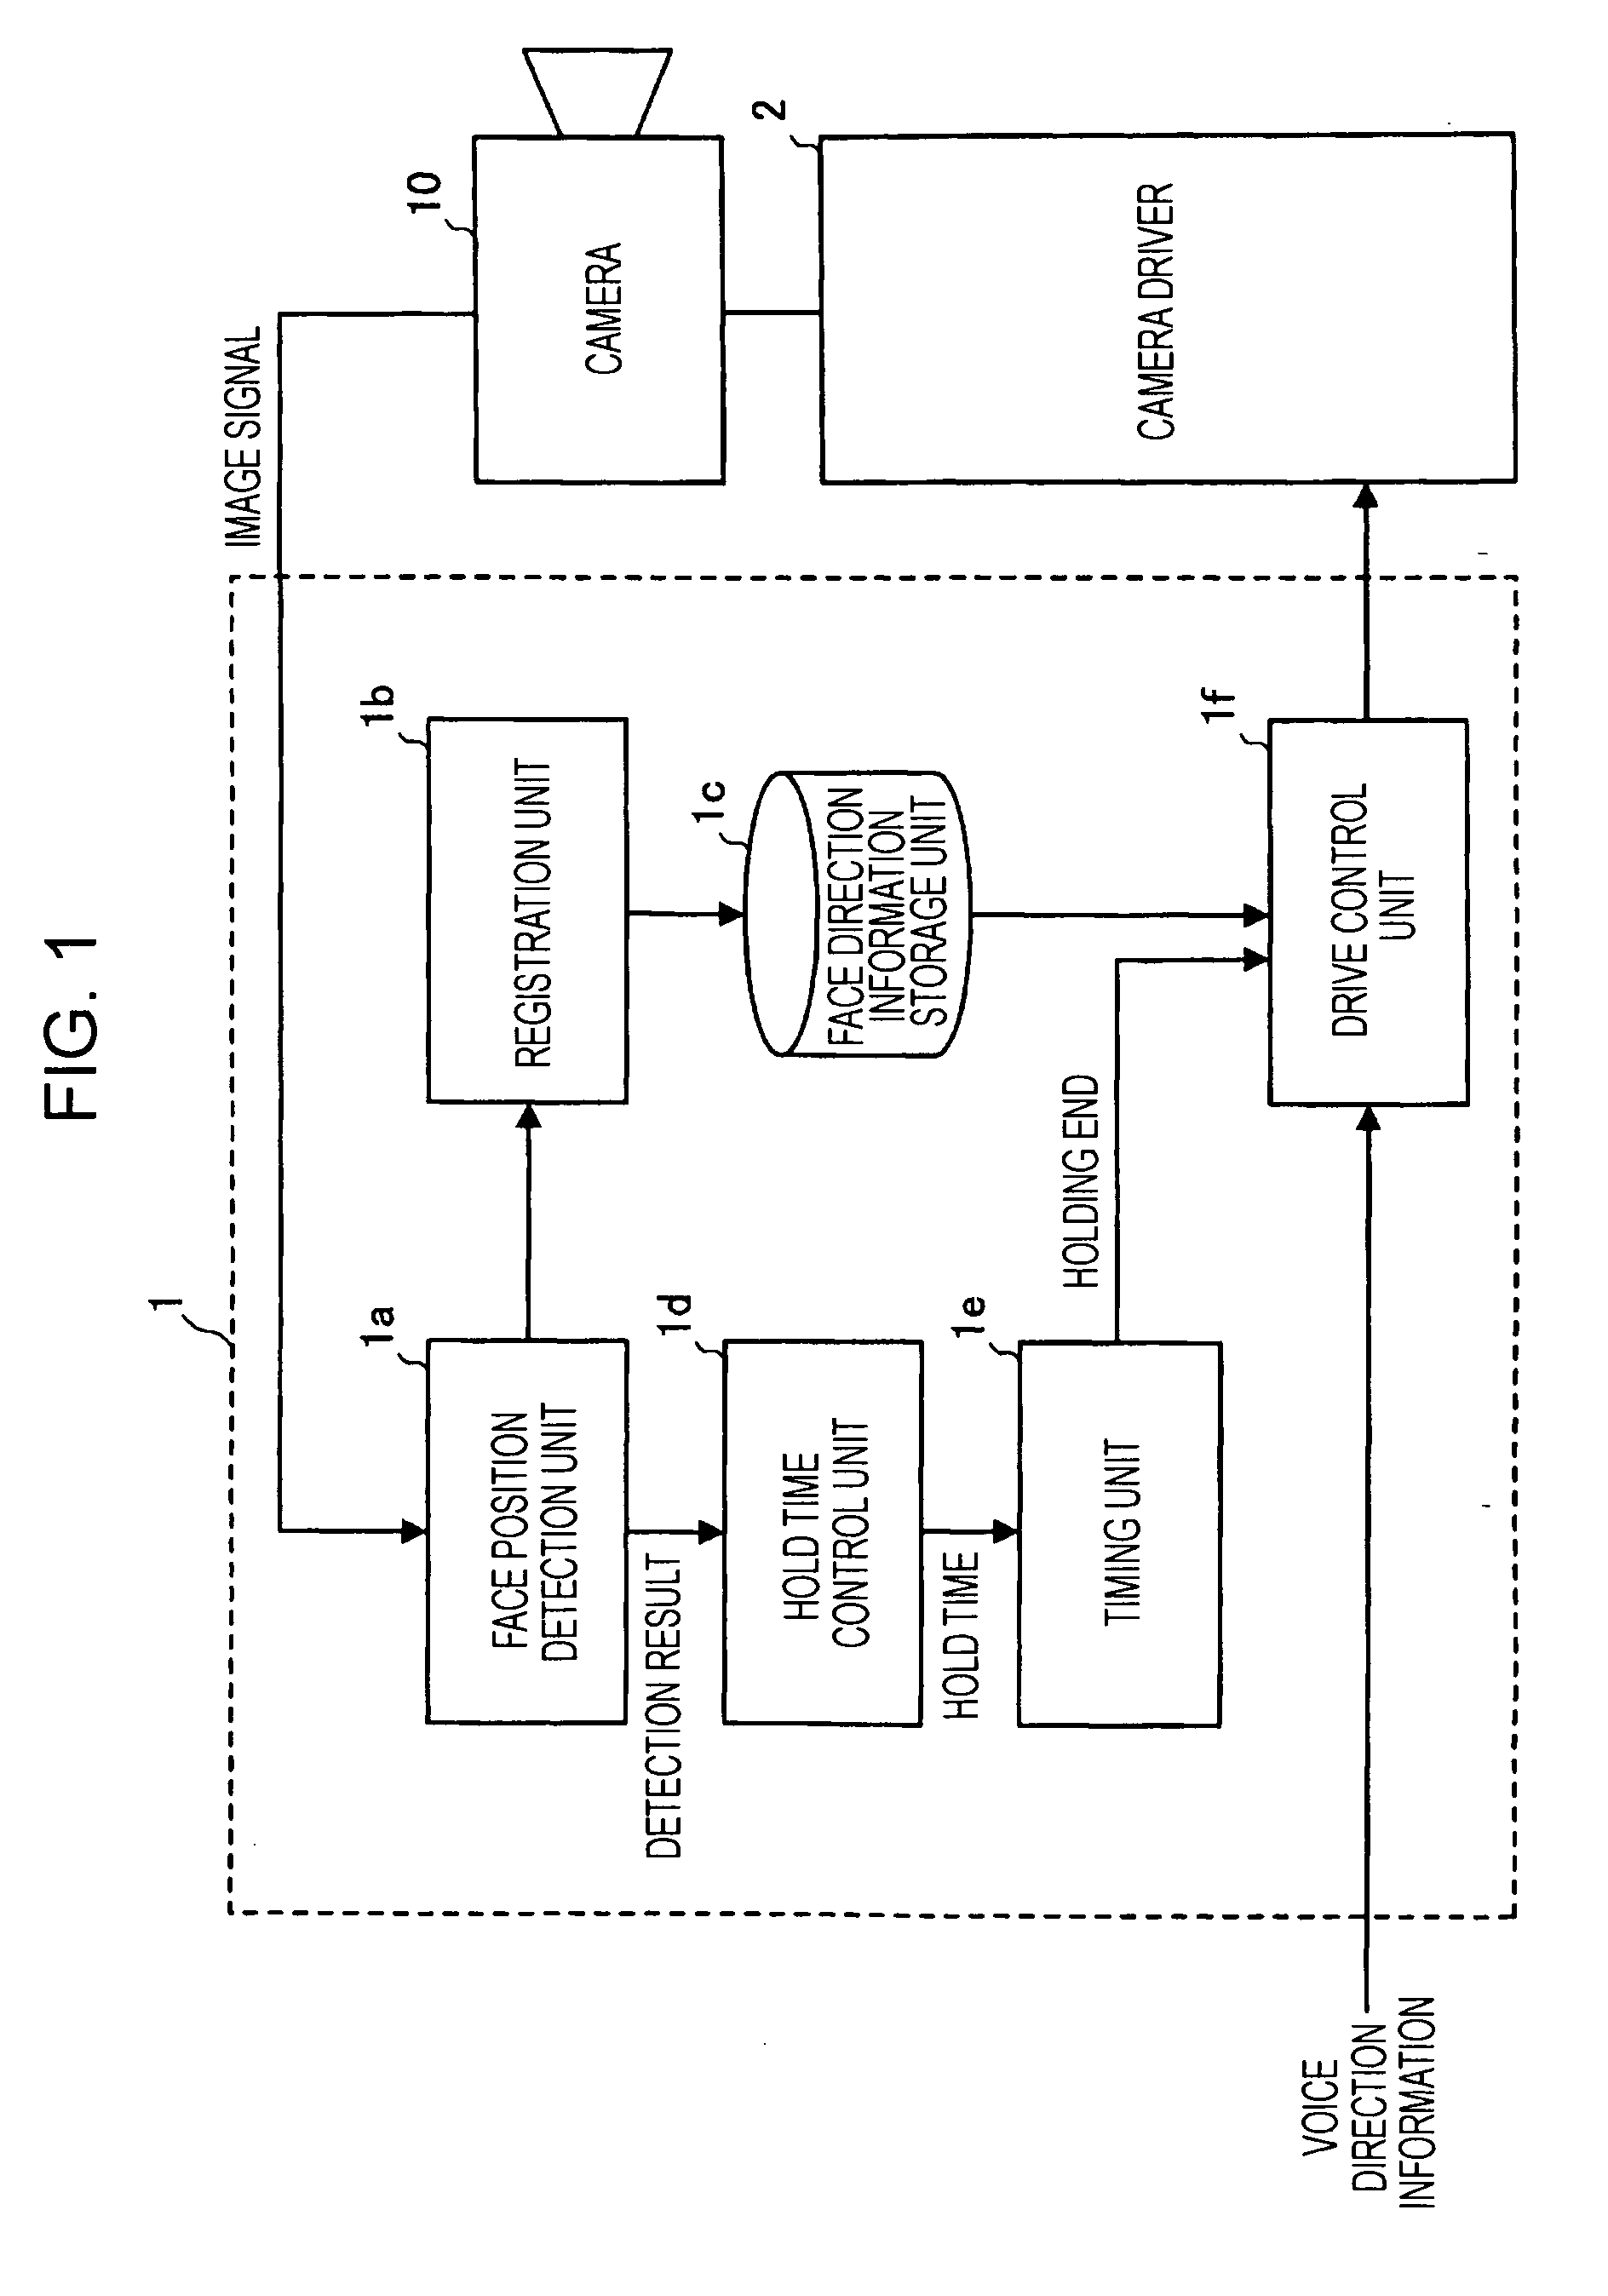 Camera controller and teleconferencing system